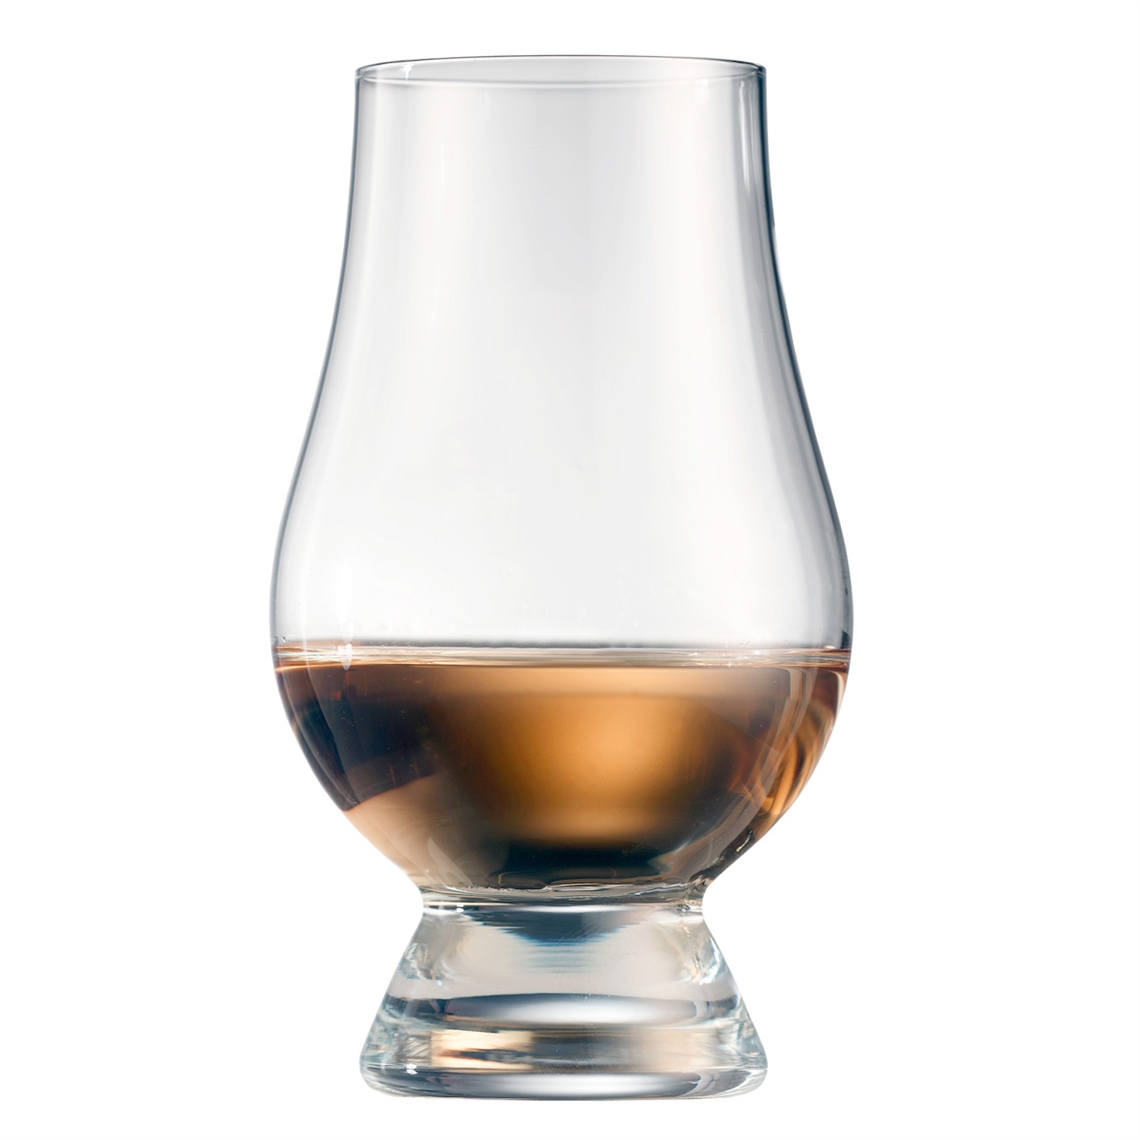 View more wine glasses from our Whisky Glasses range